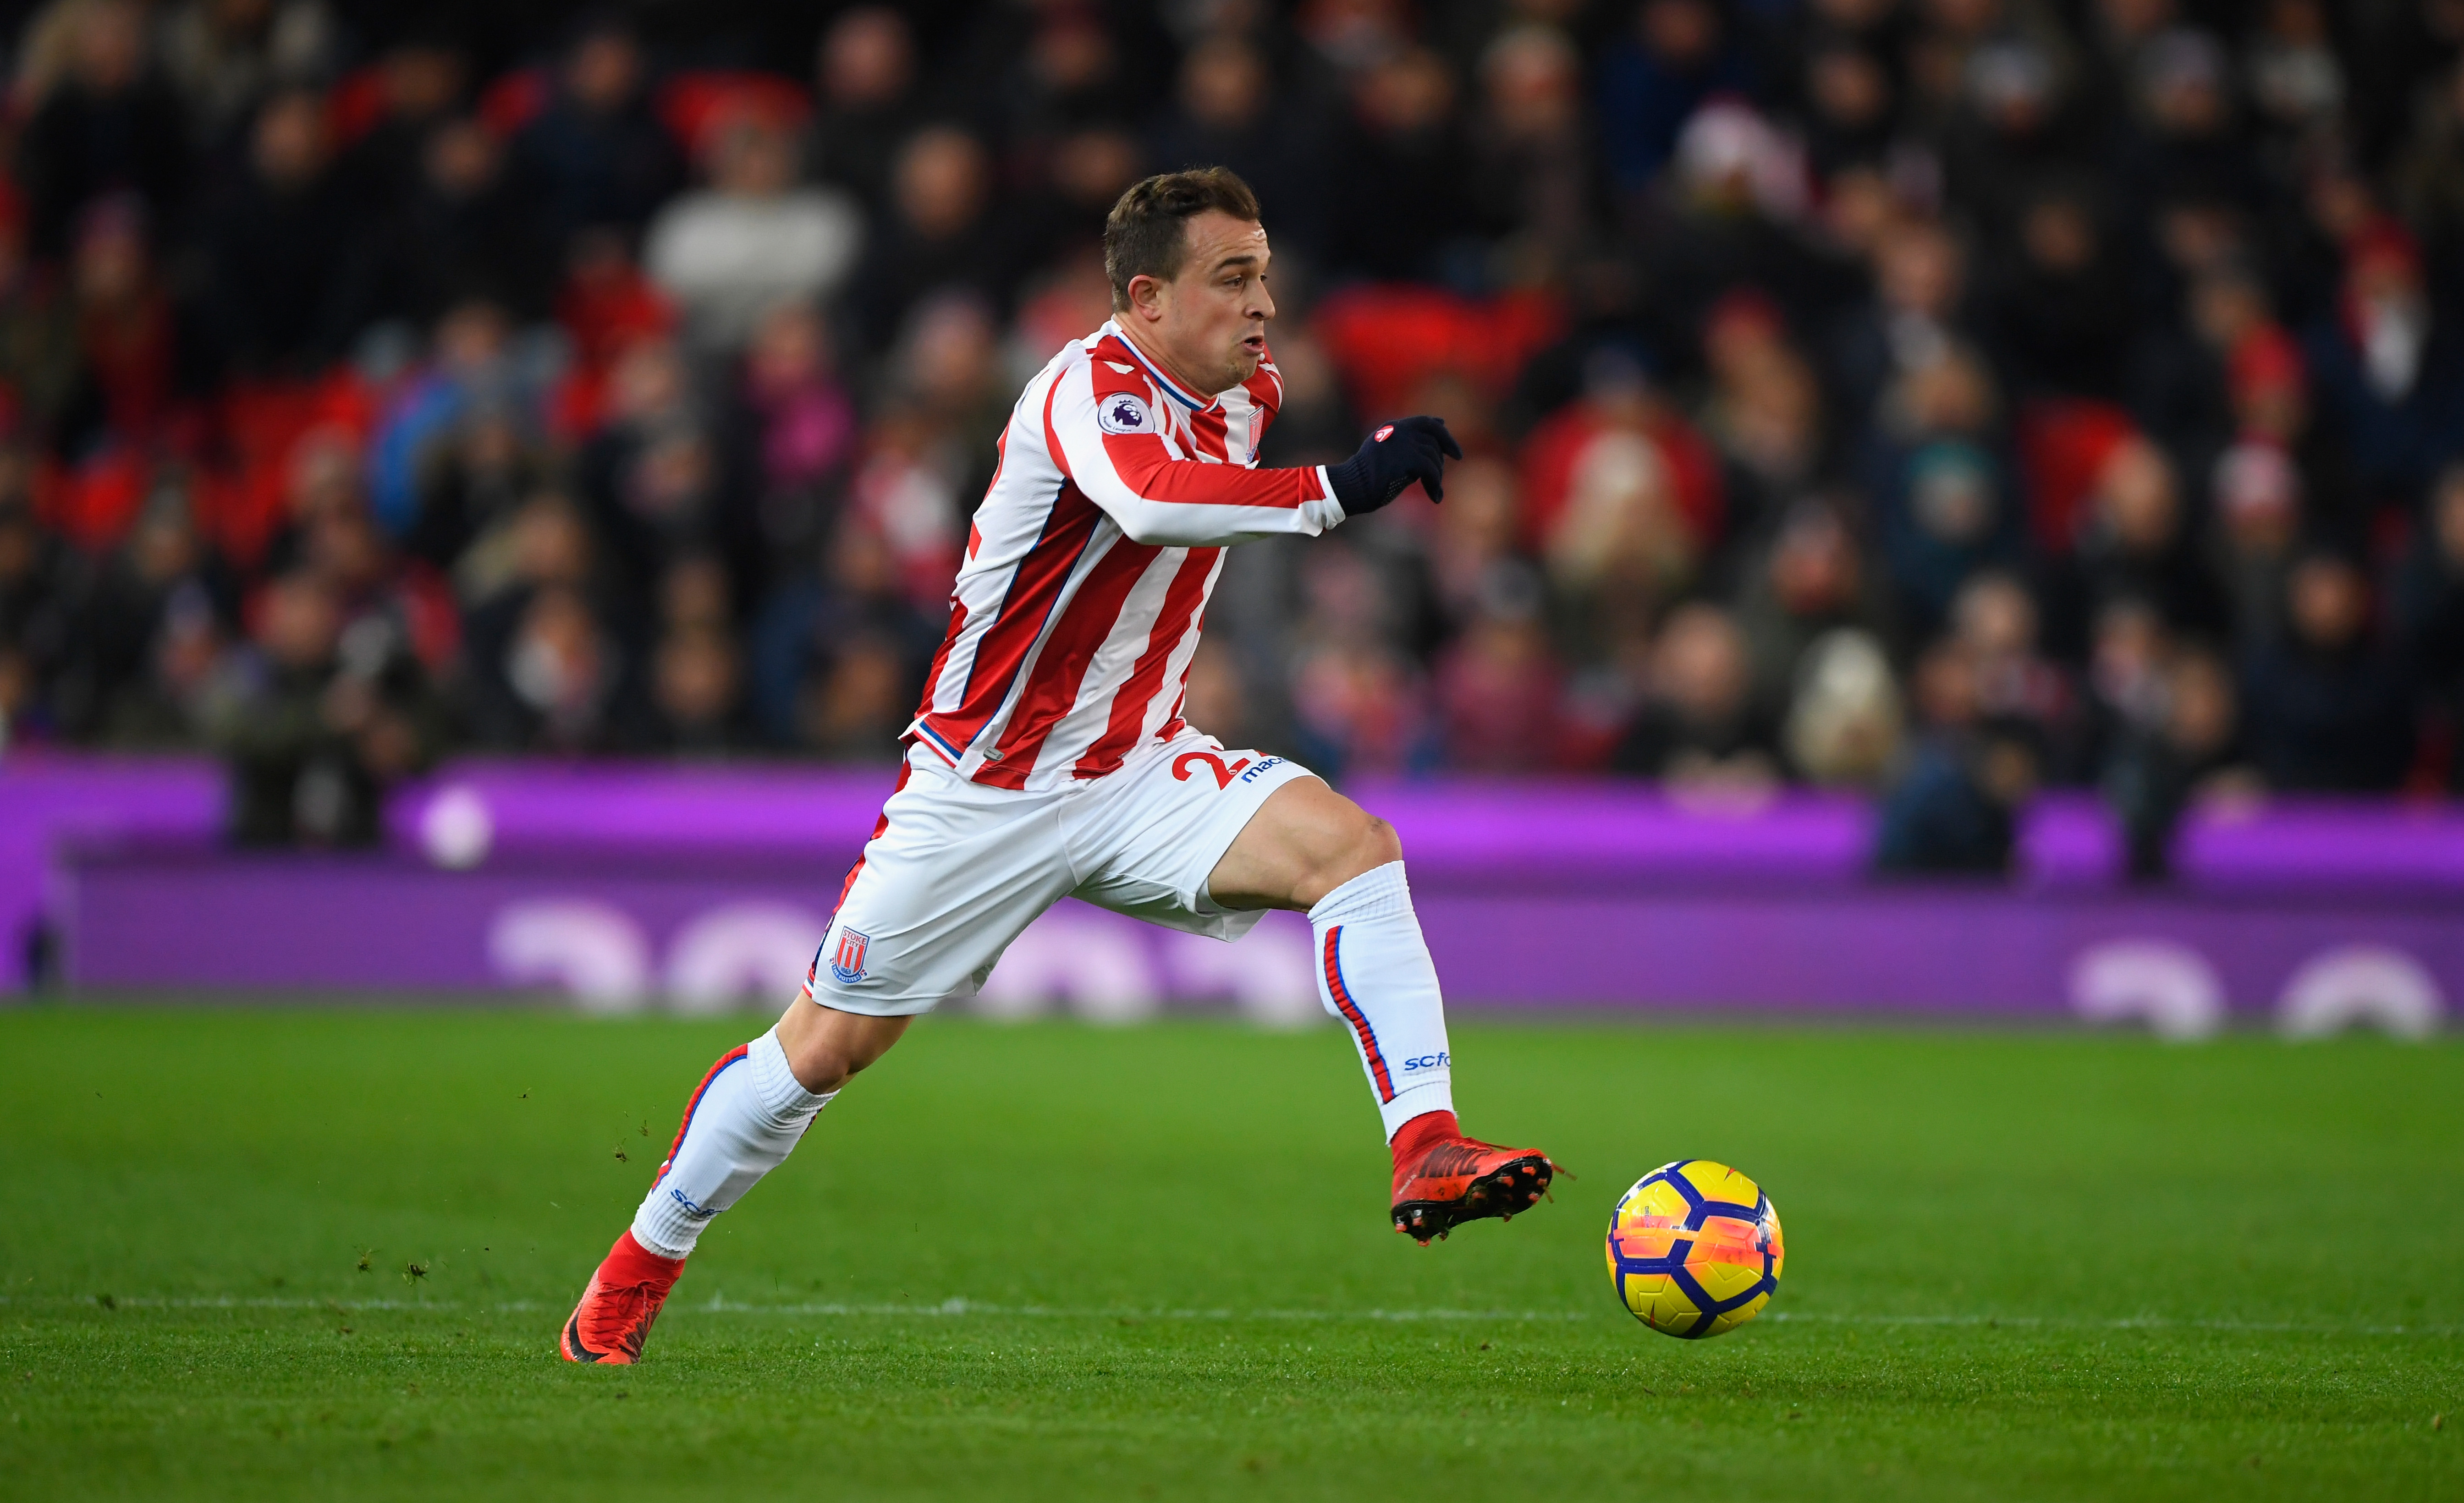 STOKE ON TRENT, ENGLAND - NOVEMBER 29:  Stoke player Xherdan Shaqiri in action during the Premier League match between Stoke City and Liverpool at Bet365 Stadium on November 29, 2017 in Stoke on Trent, England.  (Photo by Stu Forster/Getty Images)